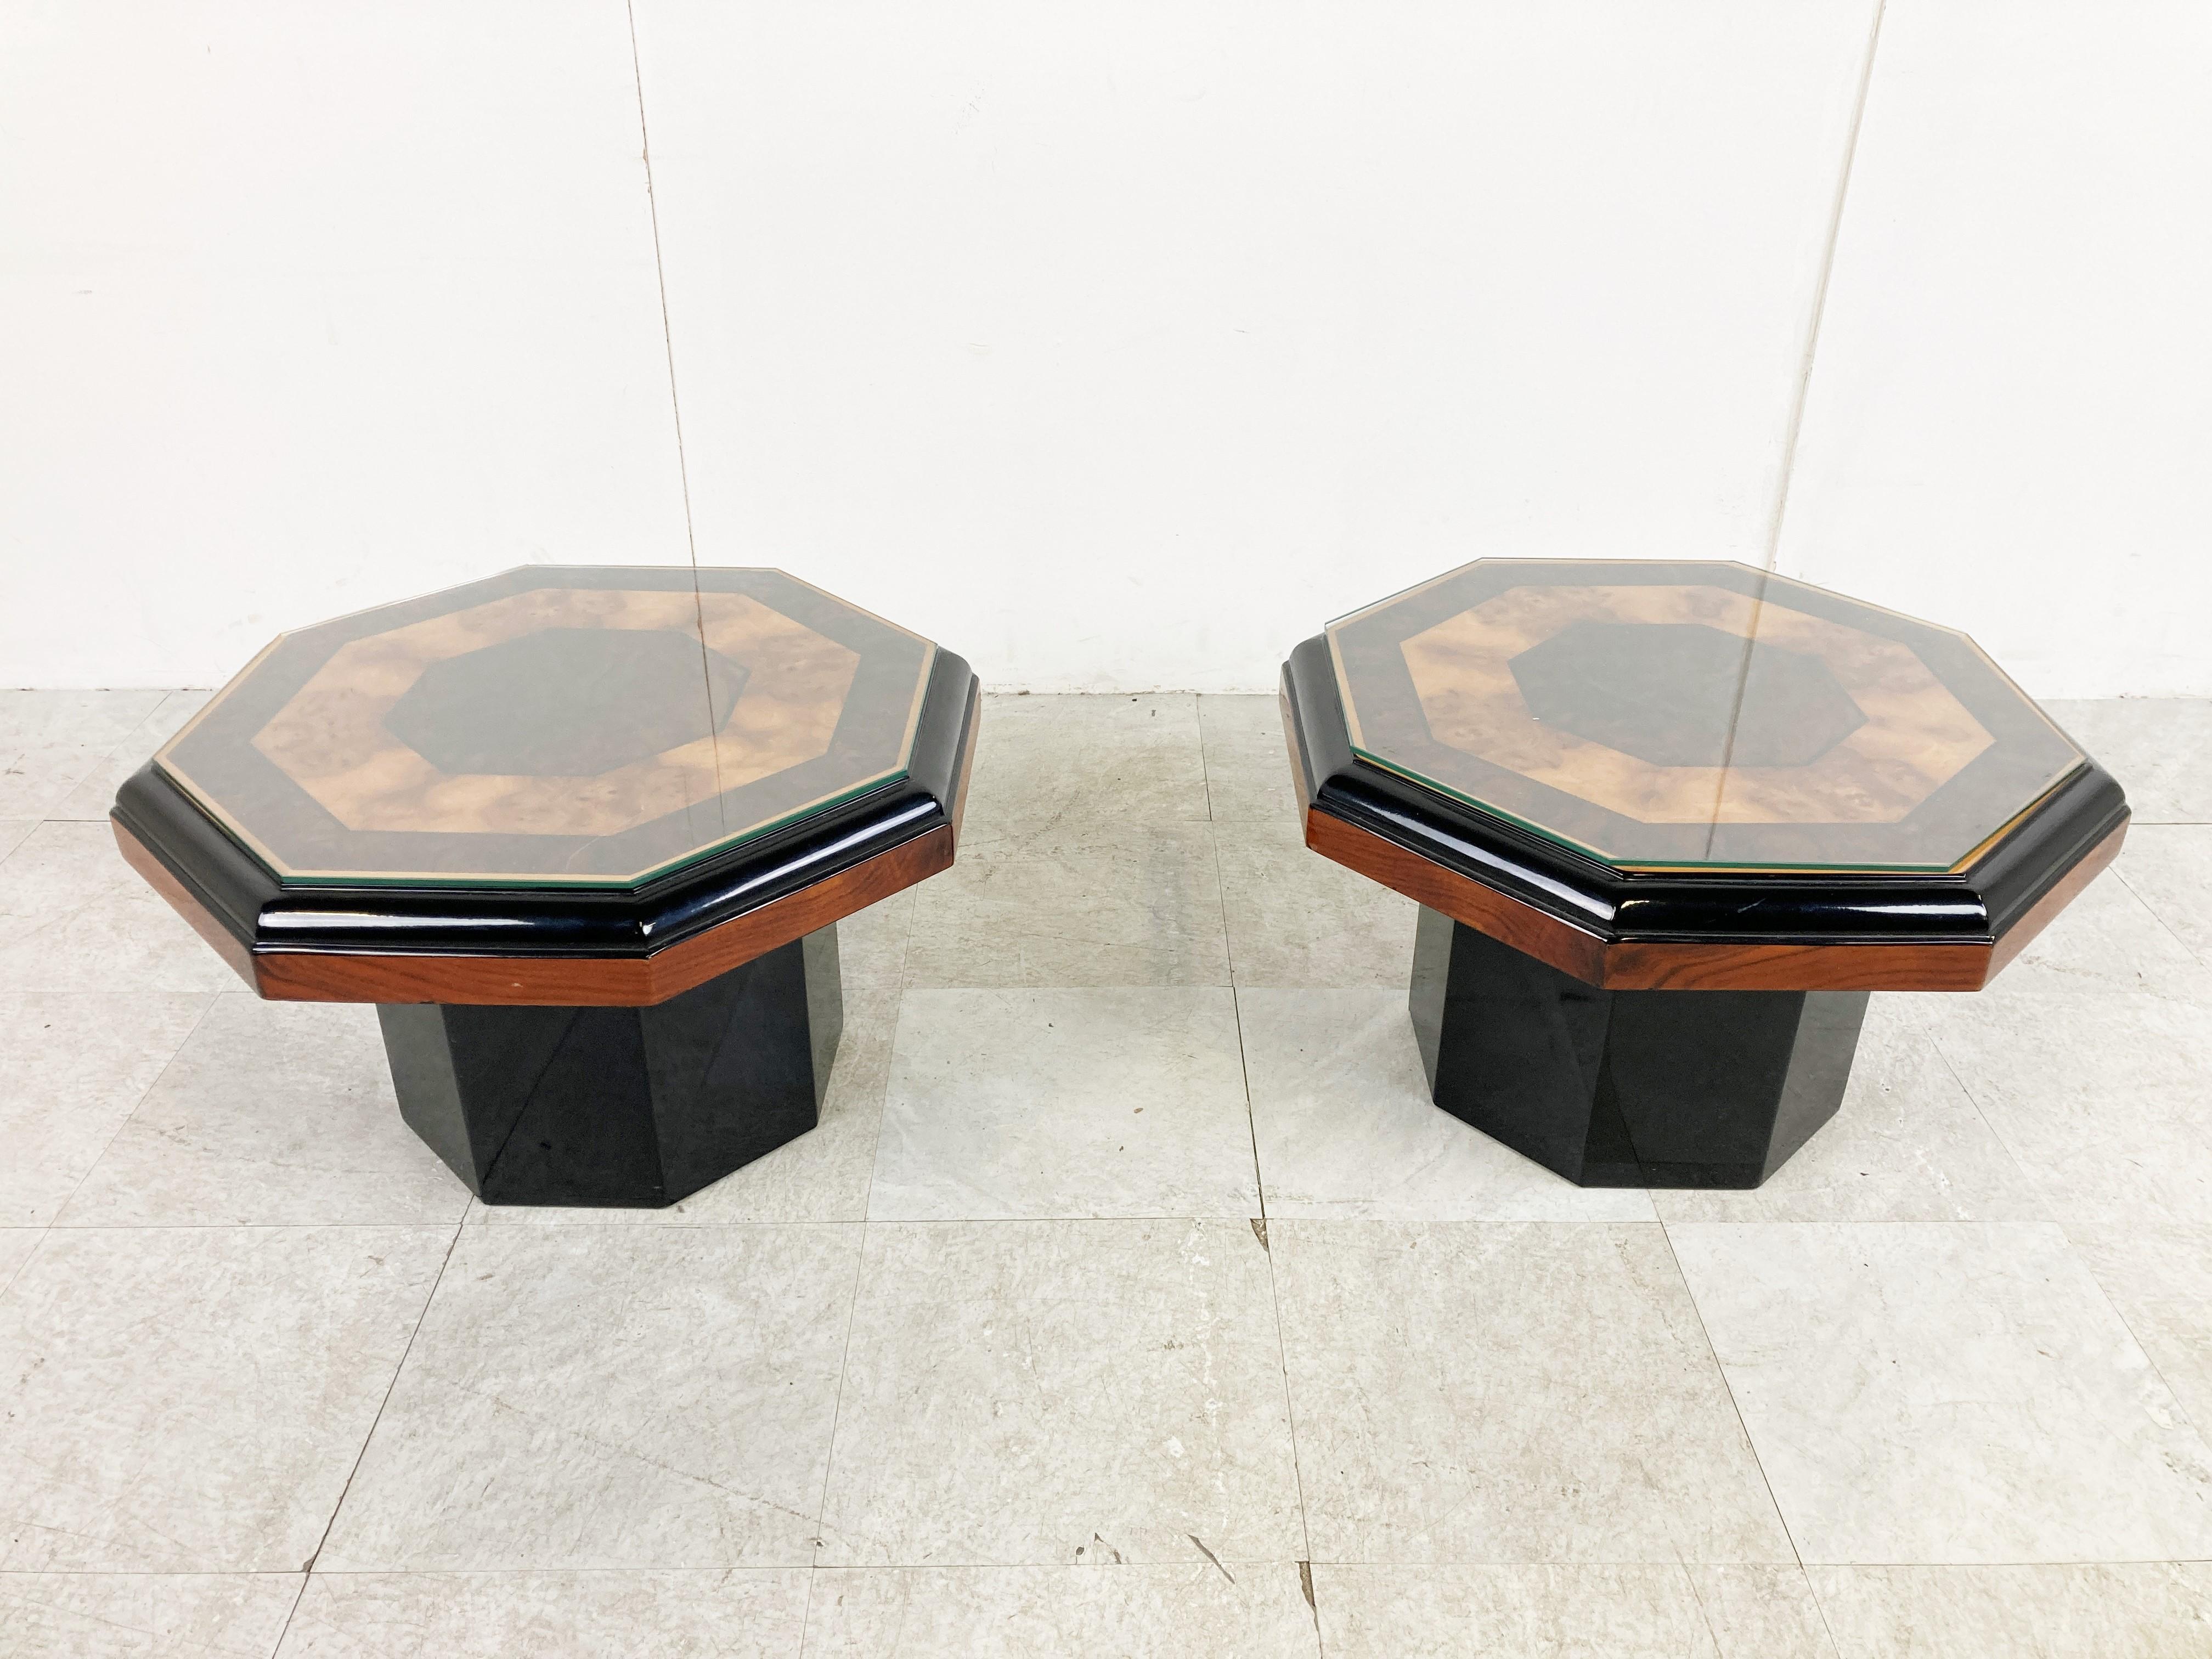 French Vintage Burl Wooden Coffee Tables, 1980s For Sale